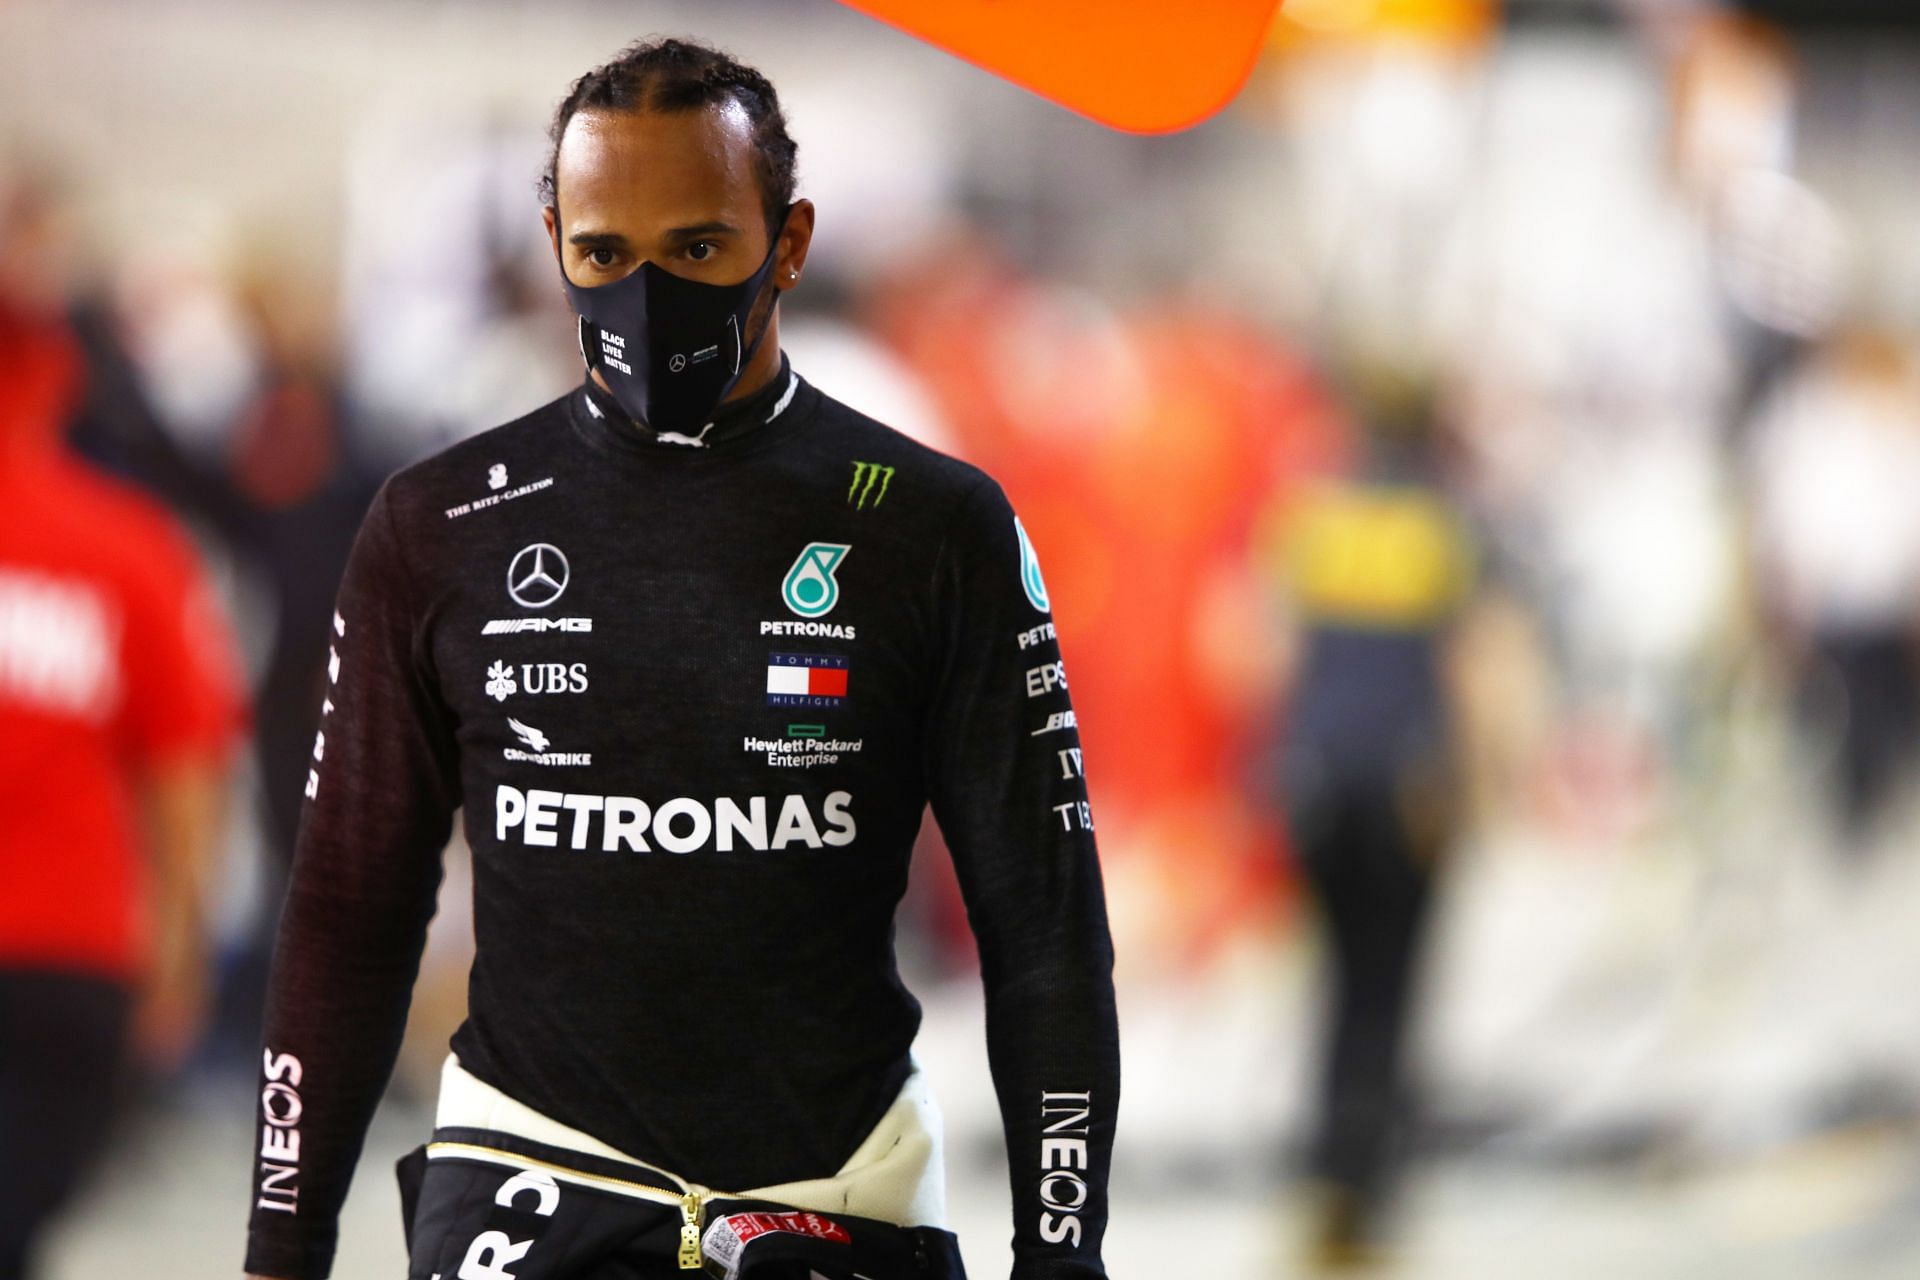 Lewis Hamilton in the F1 pitlane. (Photo by Mark Thompson/Getty Images)